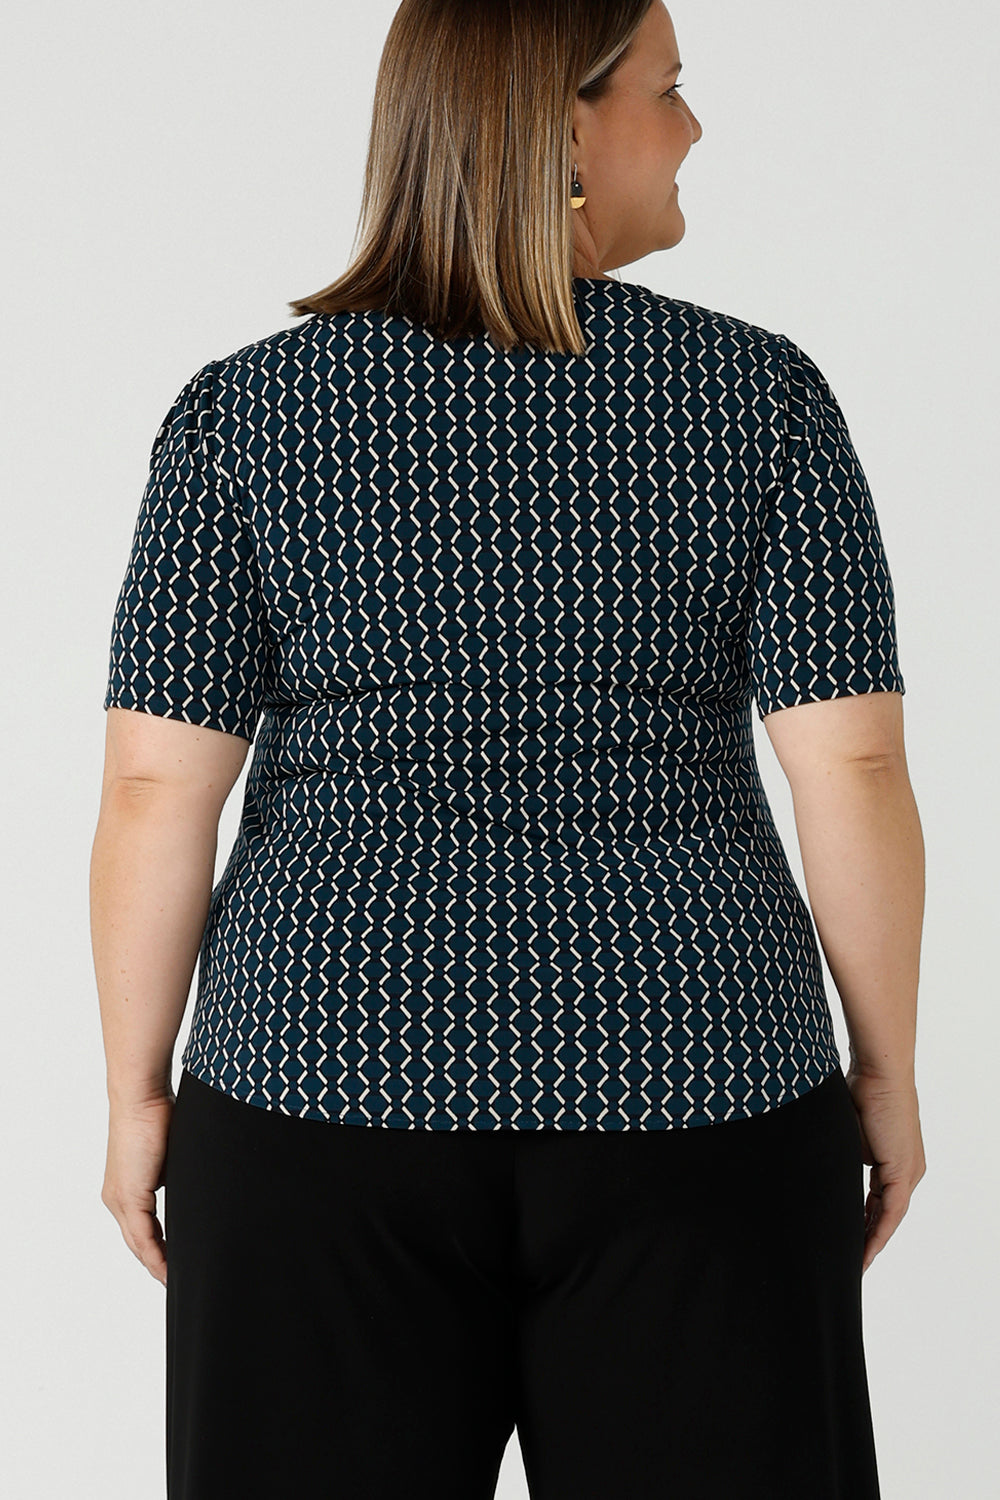 Back view of a size 16 woman wears the Berni Top in Infinity with a jade base colour and geometric pattern. A comfortable jersey work top style back with a wide leg Bradley pant in black. Made in Australia for women size 8 - 24.